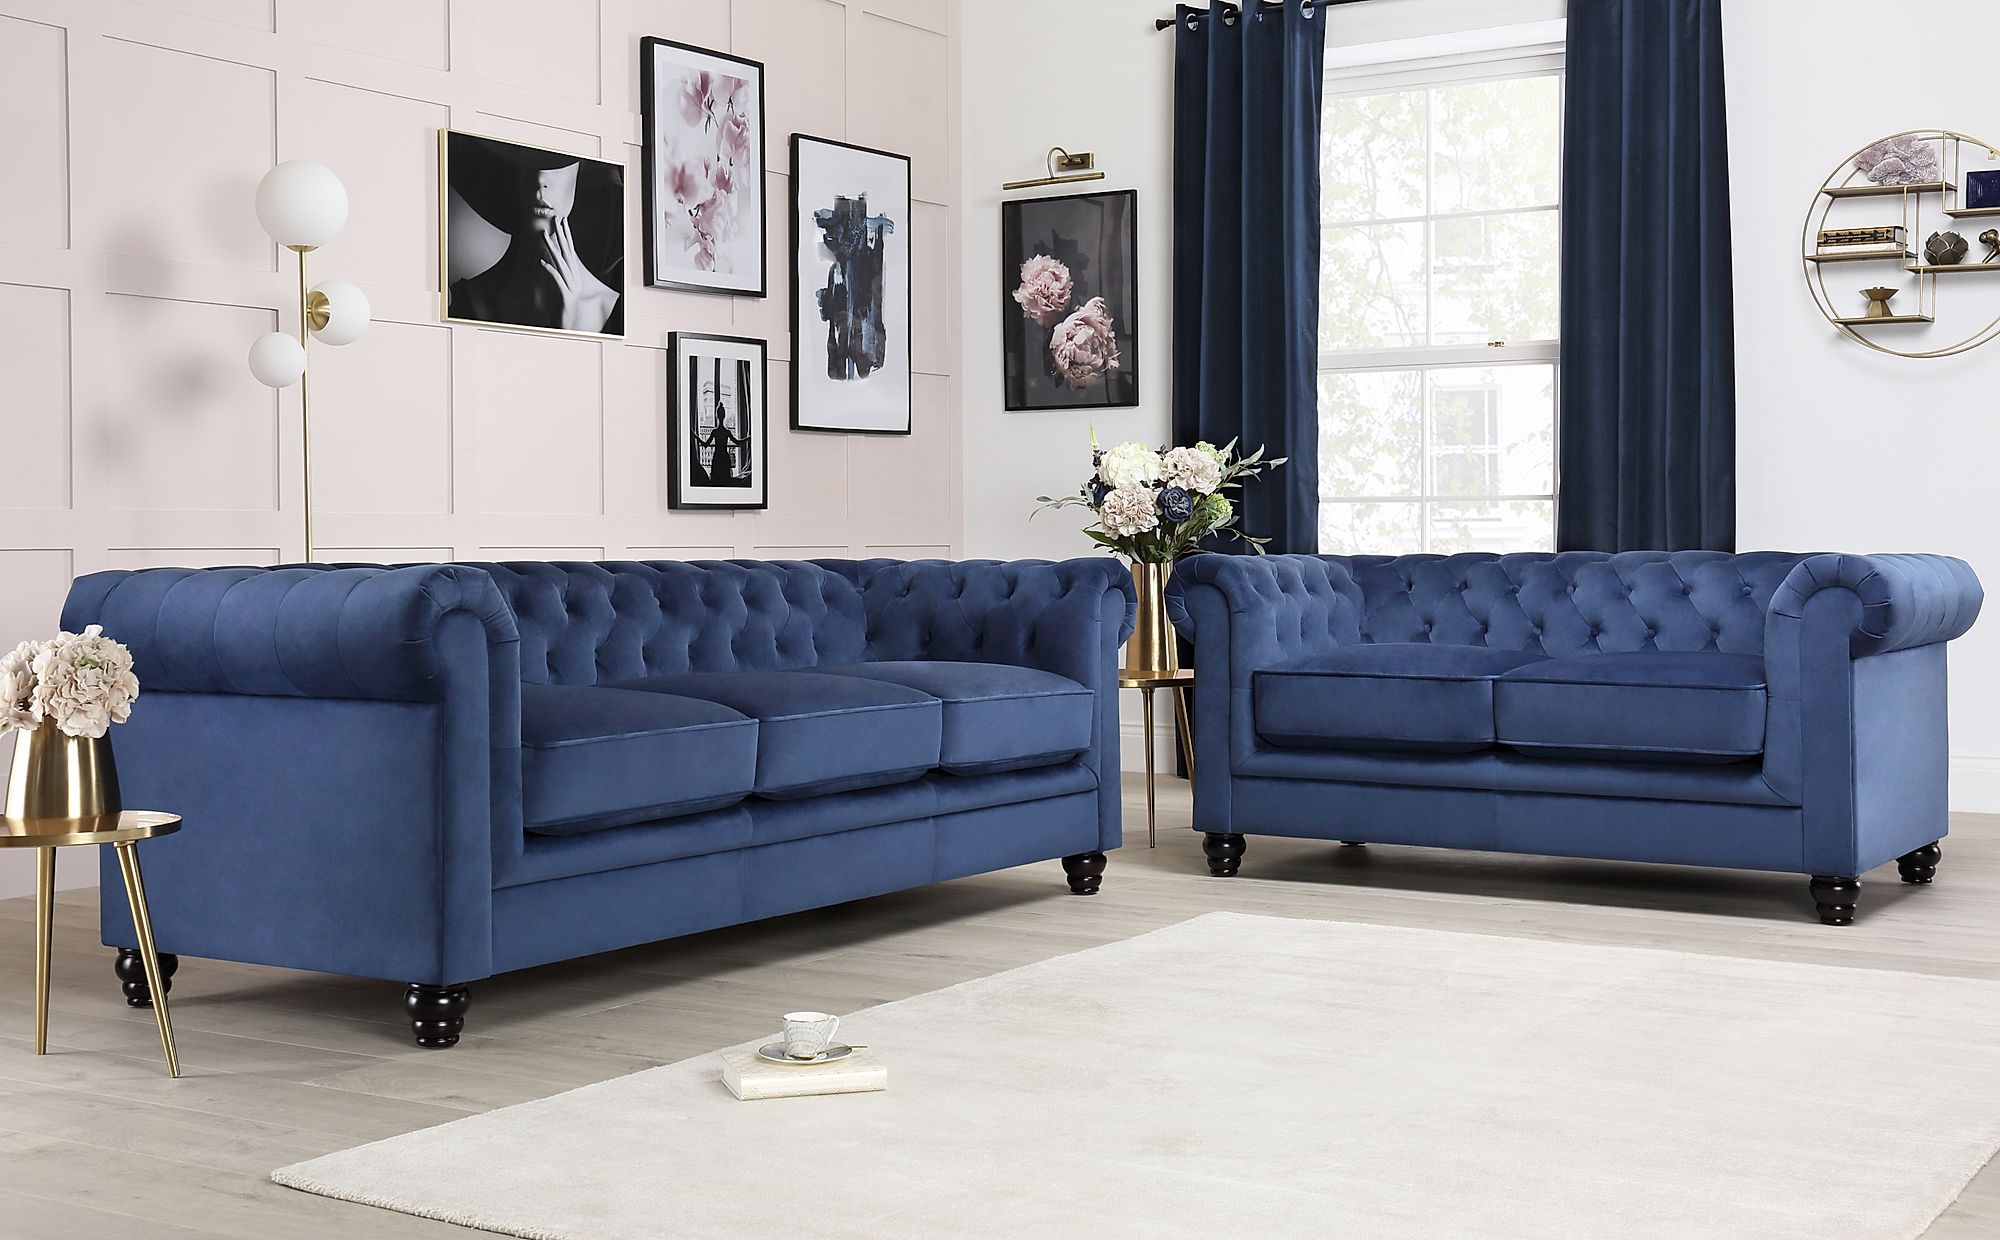 69 Striking blue chesterfield sofa bed For Every Budget